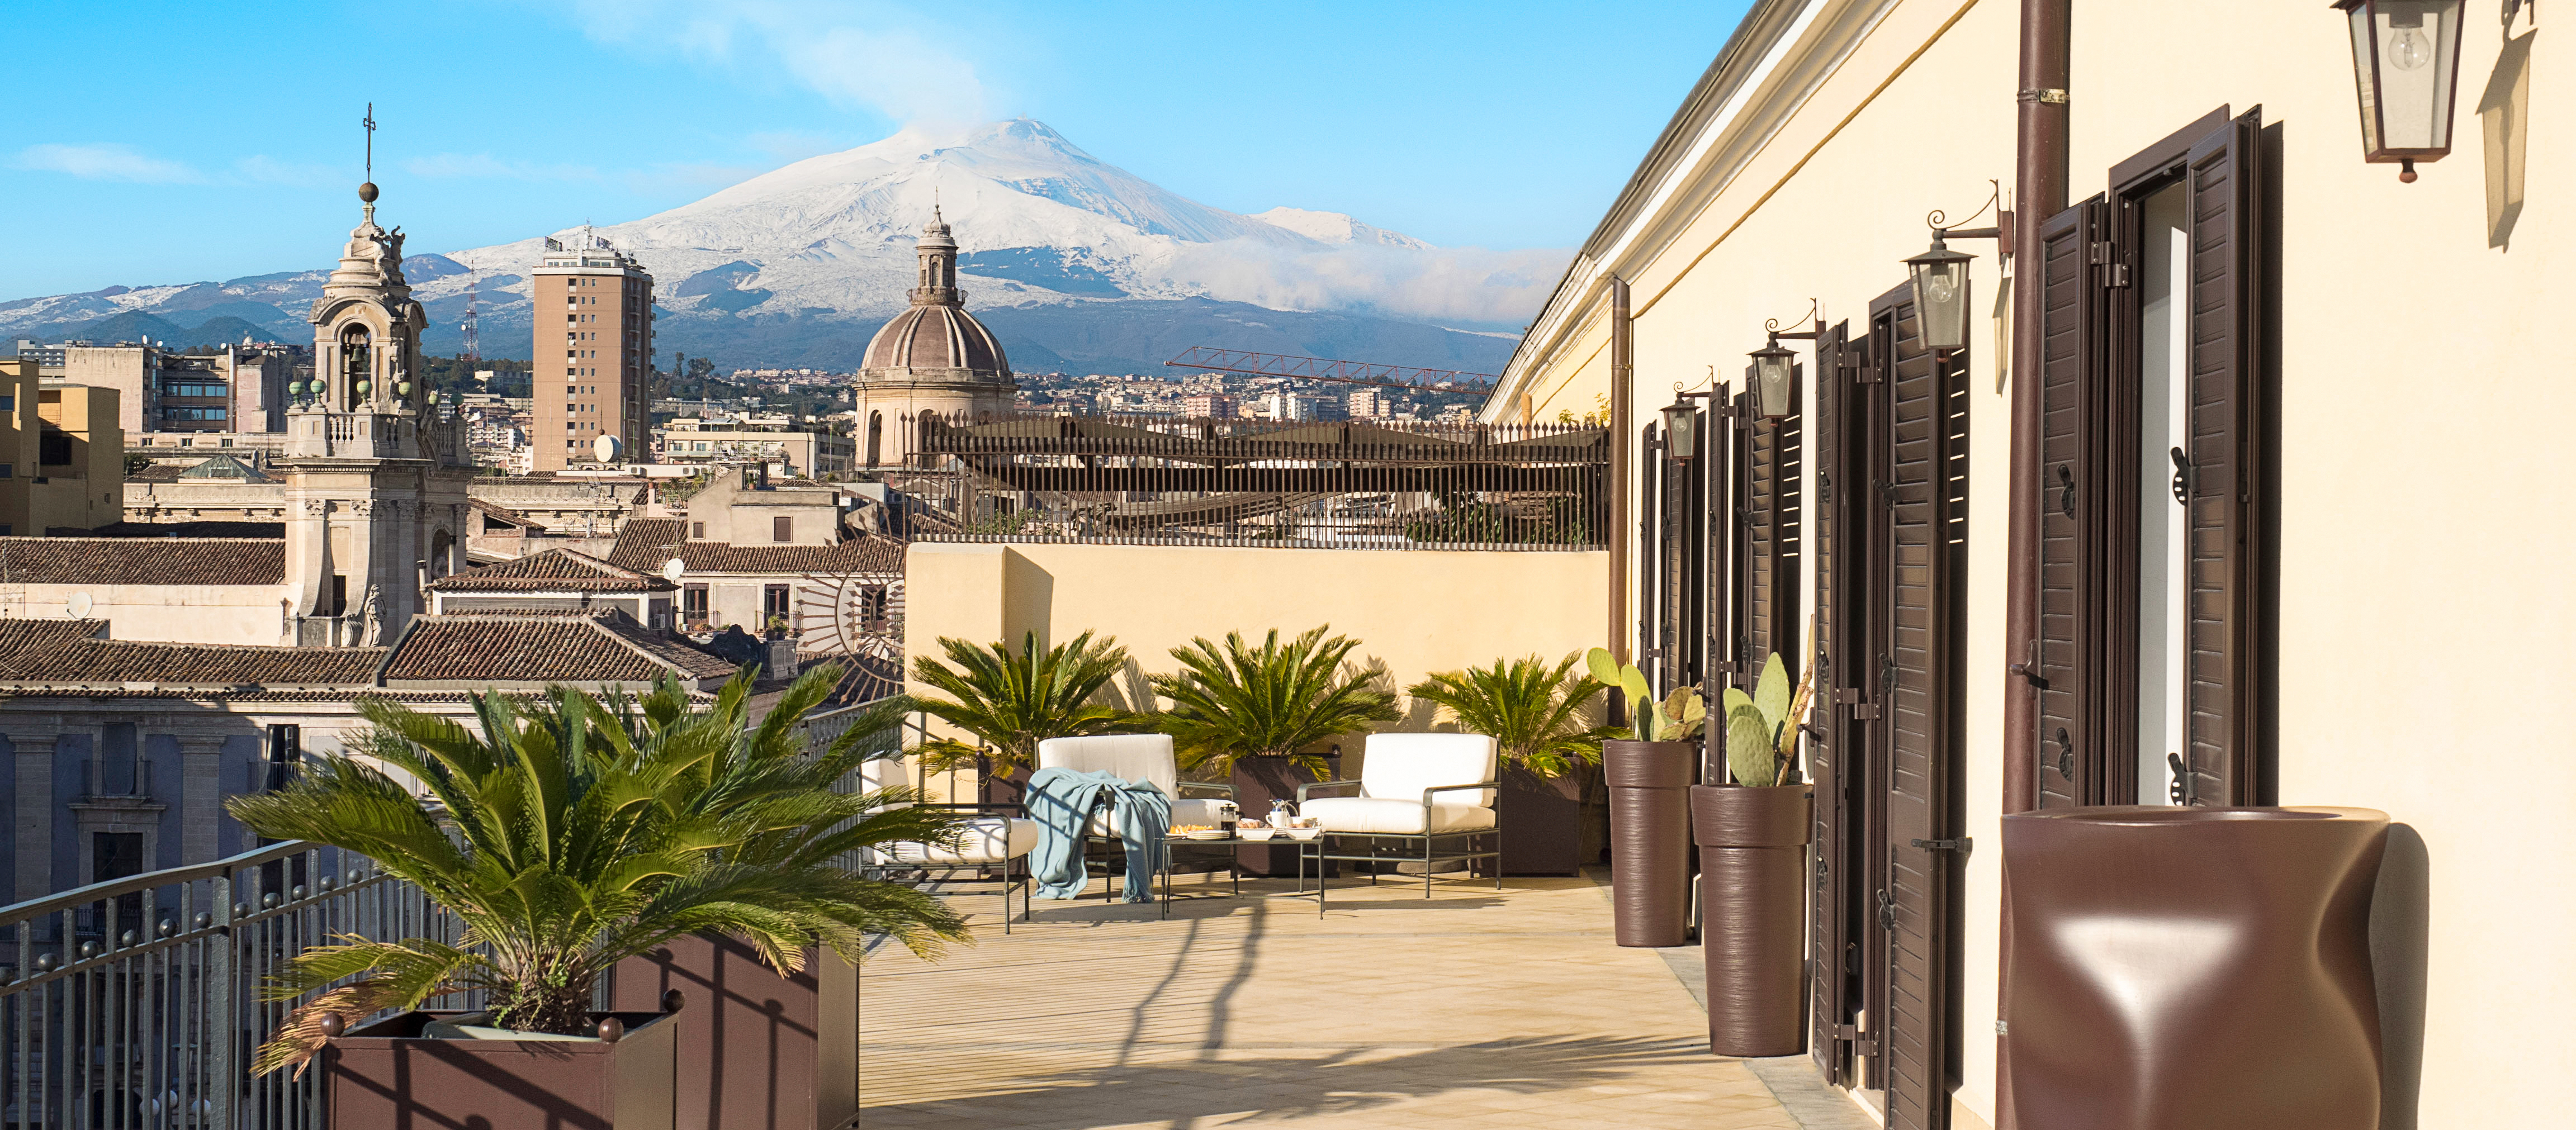 Exquisite holiday apartments in Catania, Sicily | Pure Italy - 2